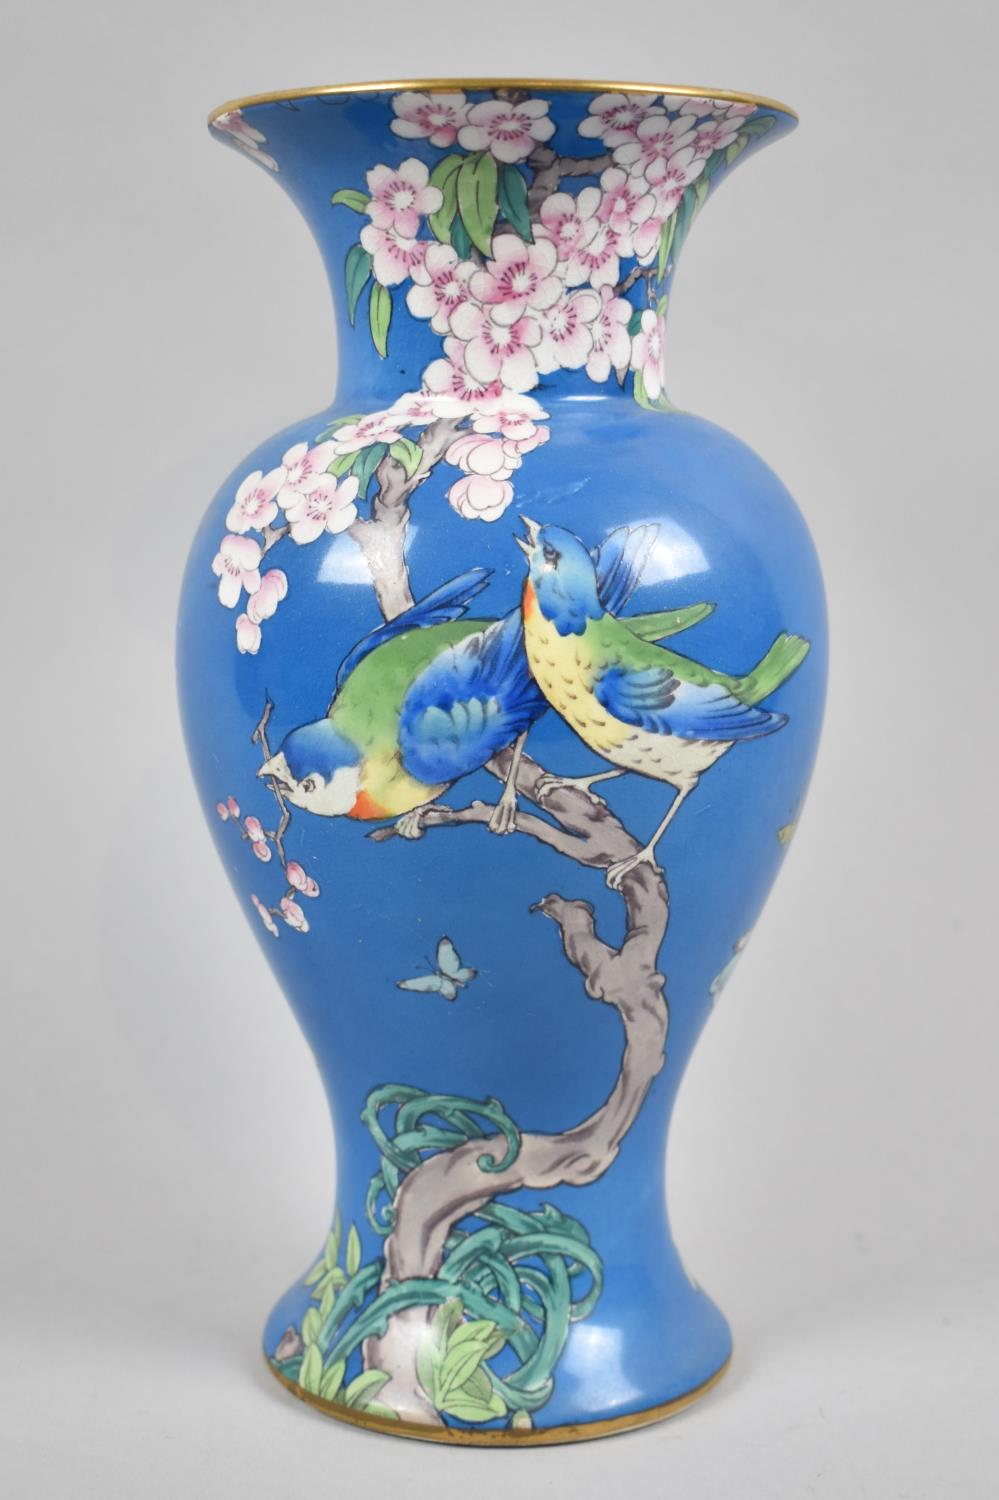 A Whieldon Ware Picardy Bird Decorated Vase, 26cm high